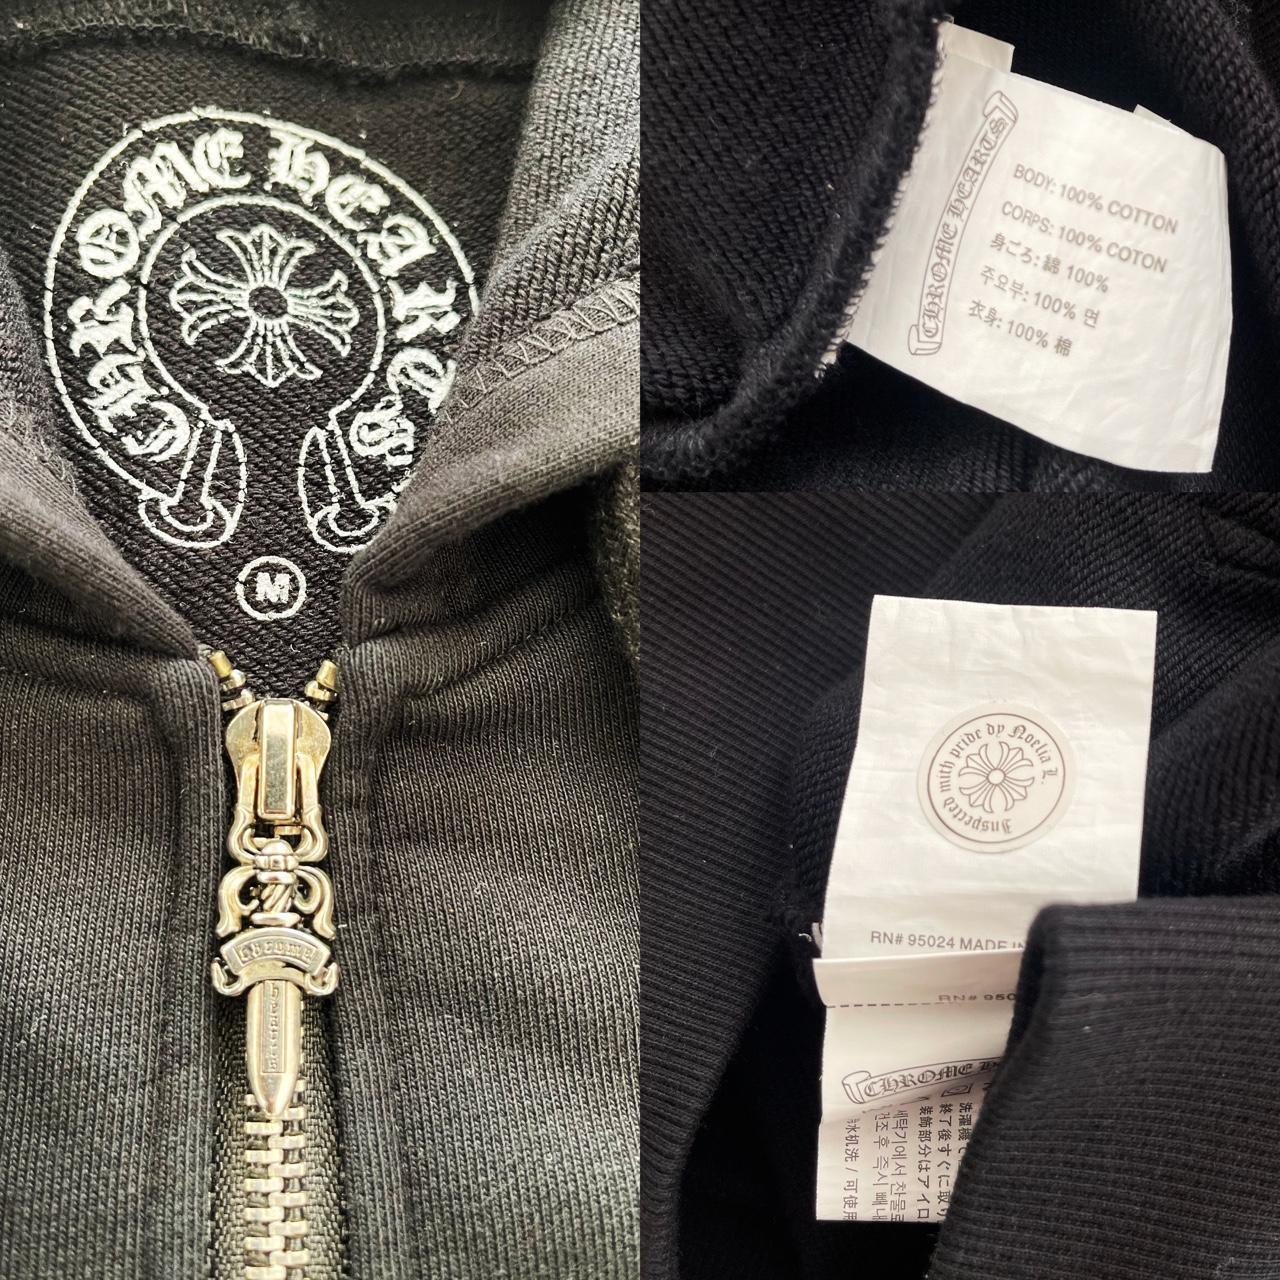 Chrome Hearts Hoodie - Known Source